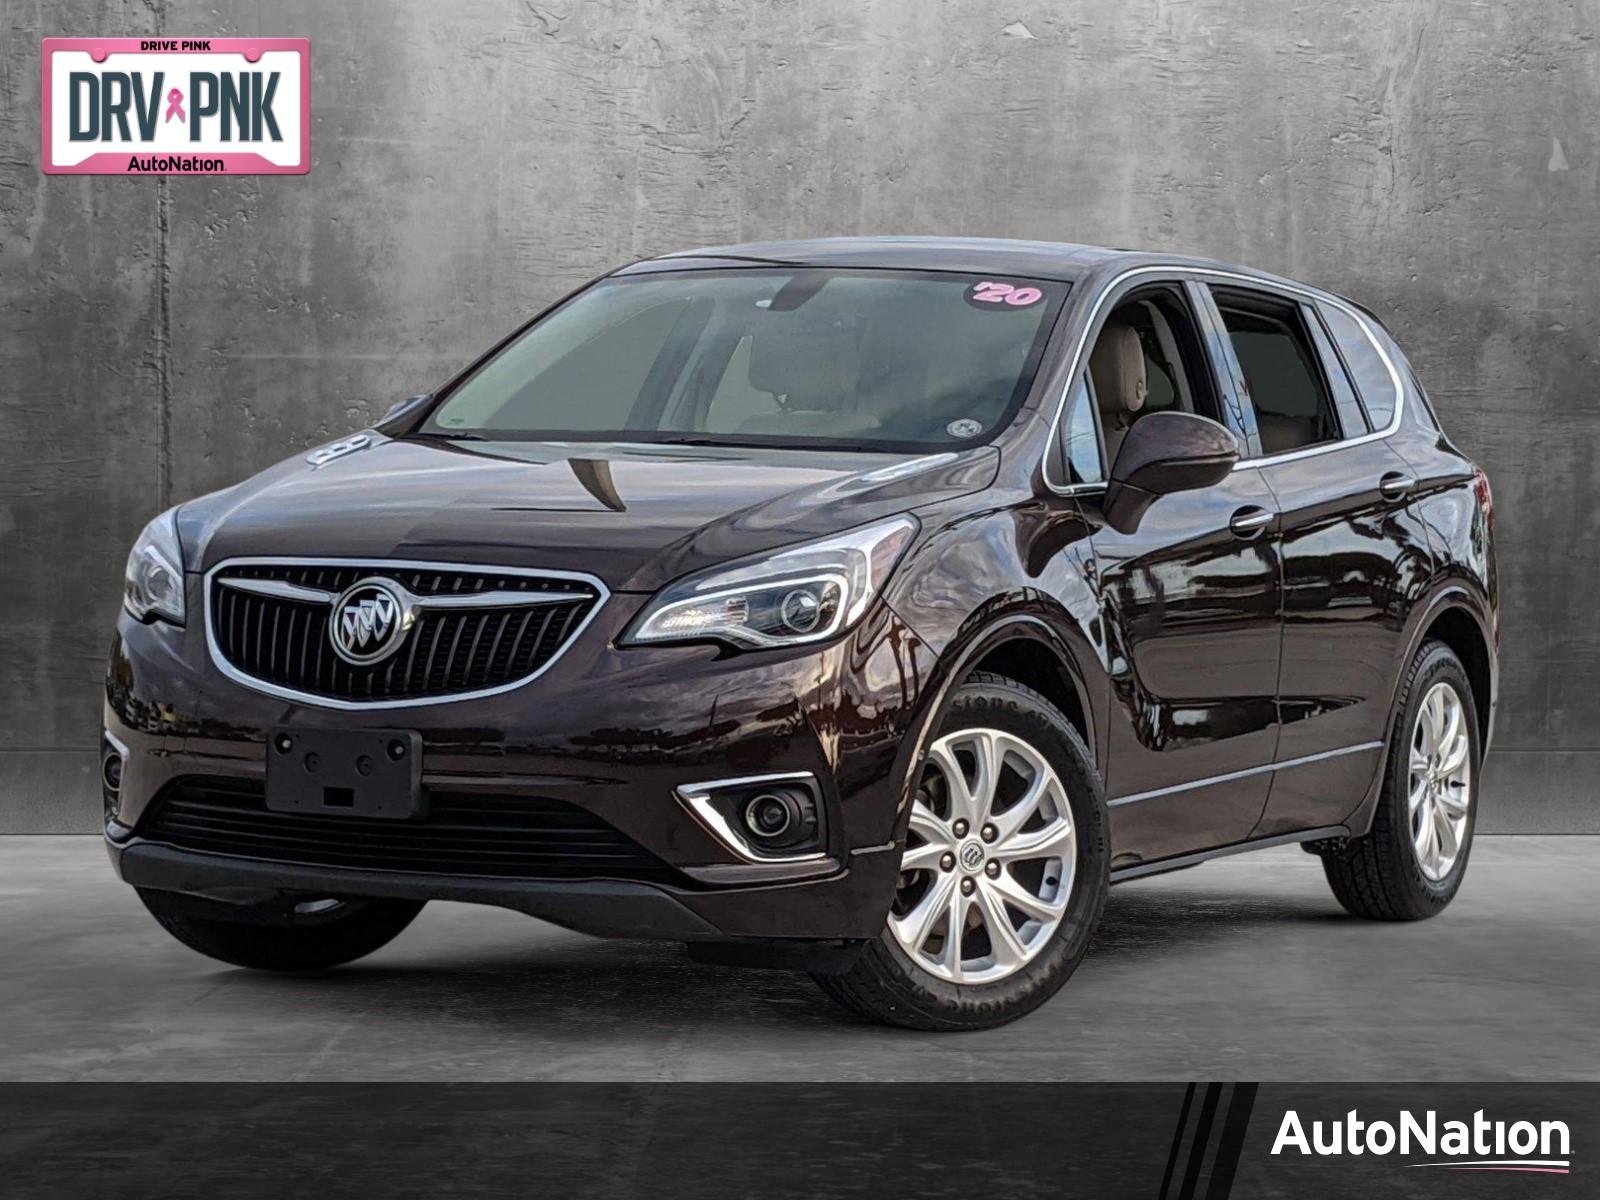 2020 Buick Envision Vehicle Photo in Pembroke Pines, FL 33027